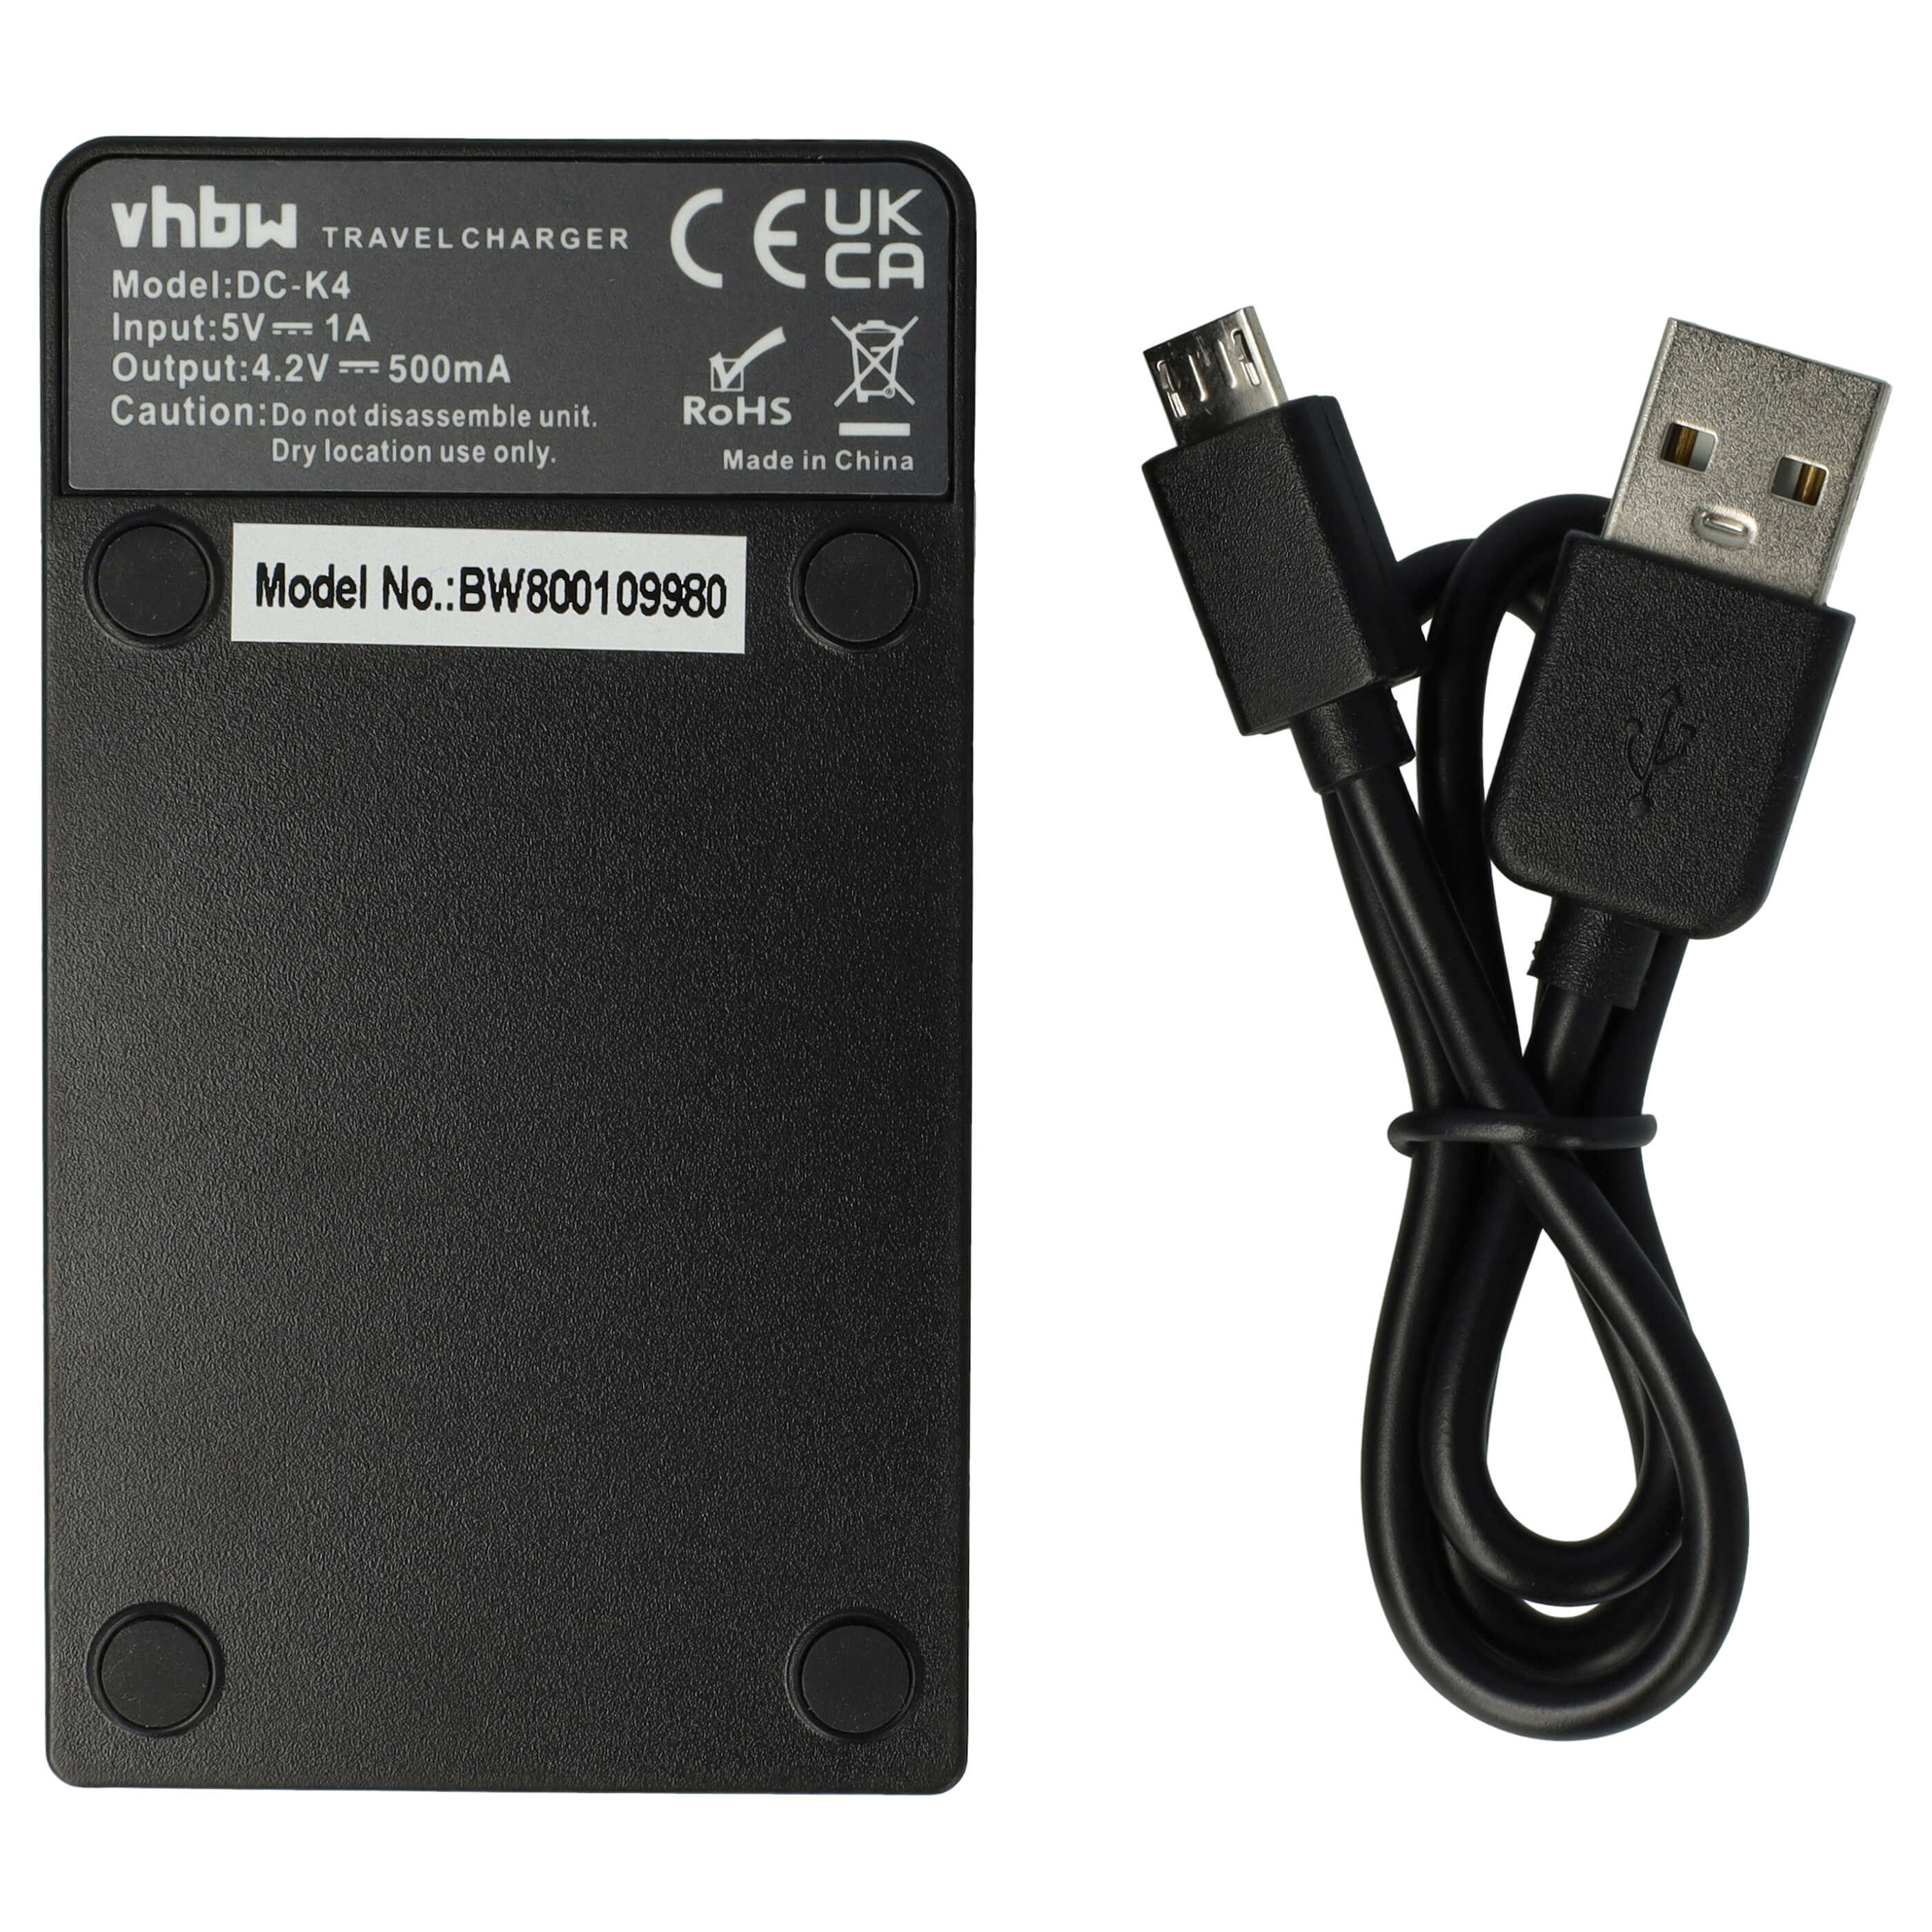 Micro USB Charger suitable for SHW-M410 Samsung SHW-M410 Samsung Mobile Battery - Cradle + Cable, 40 cm